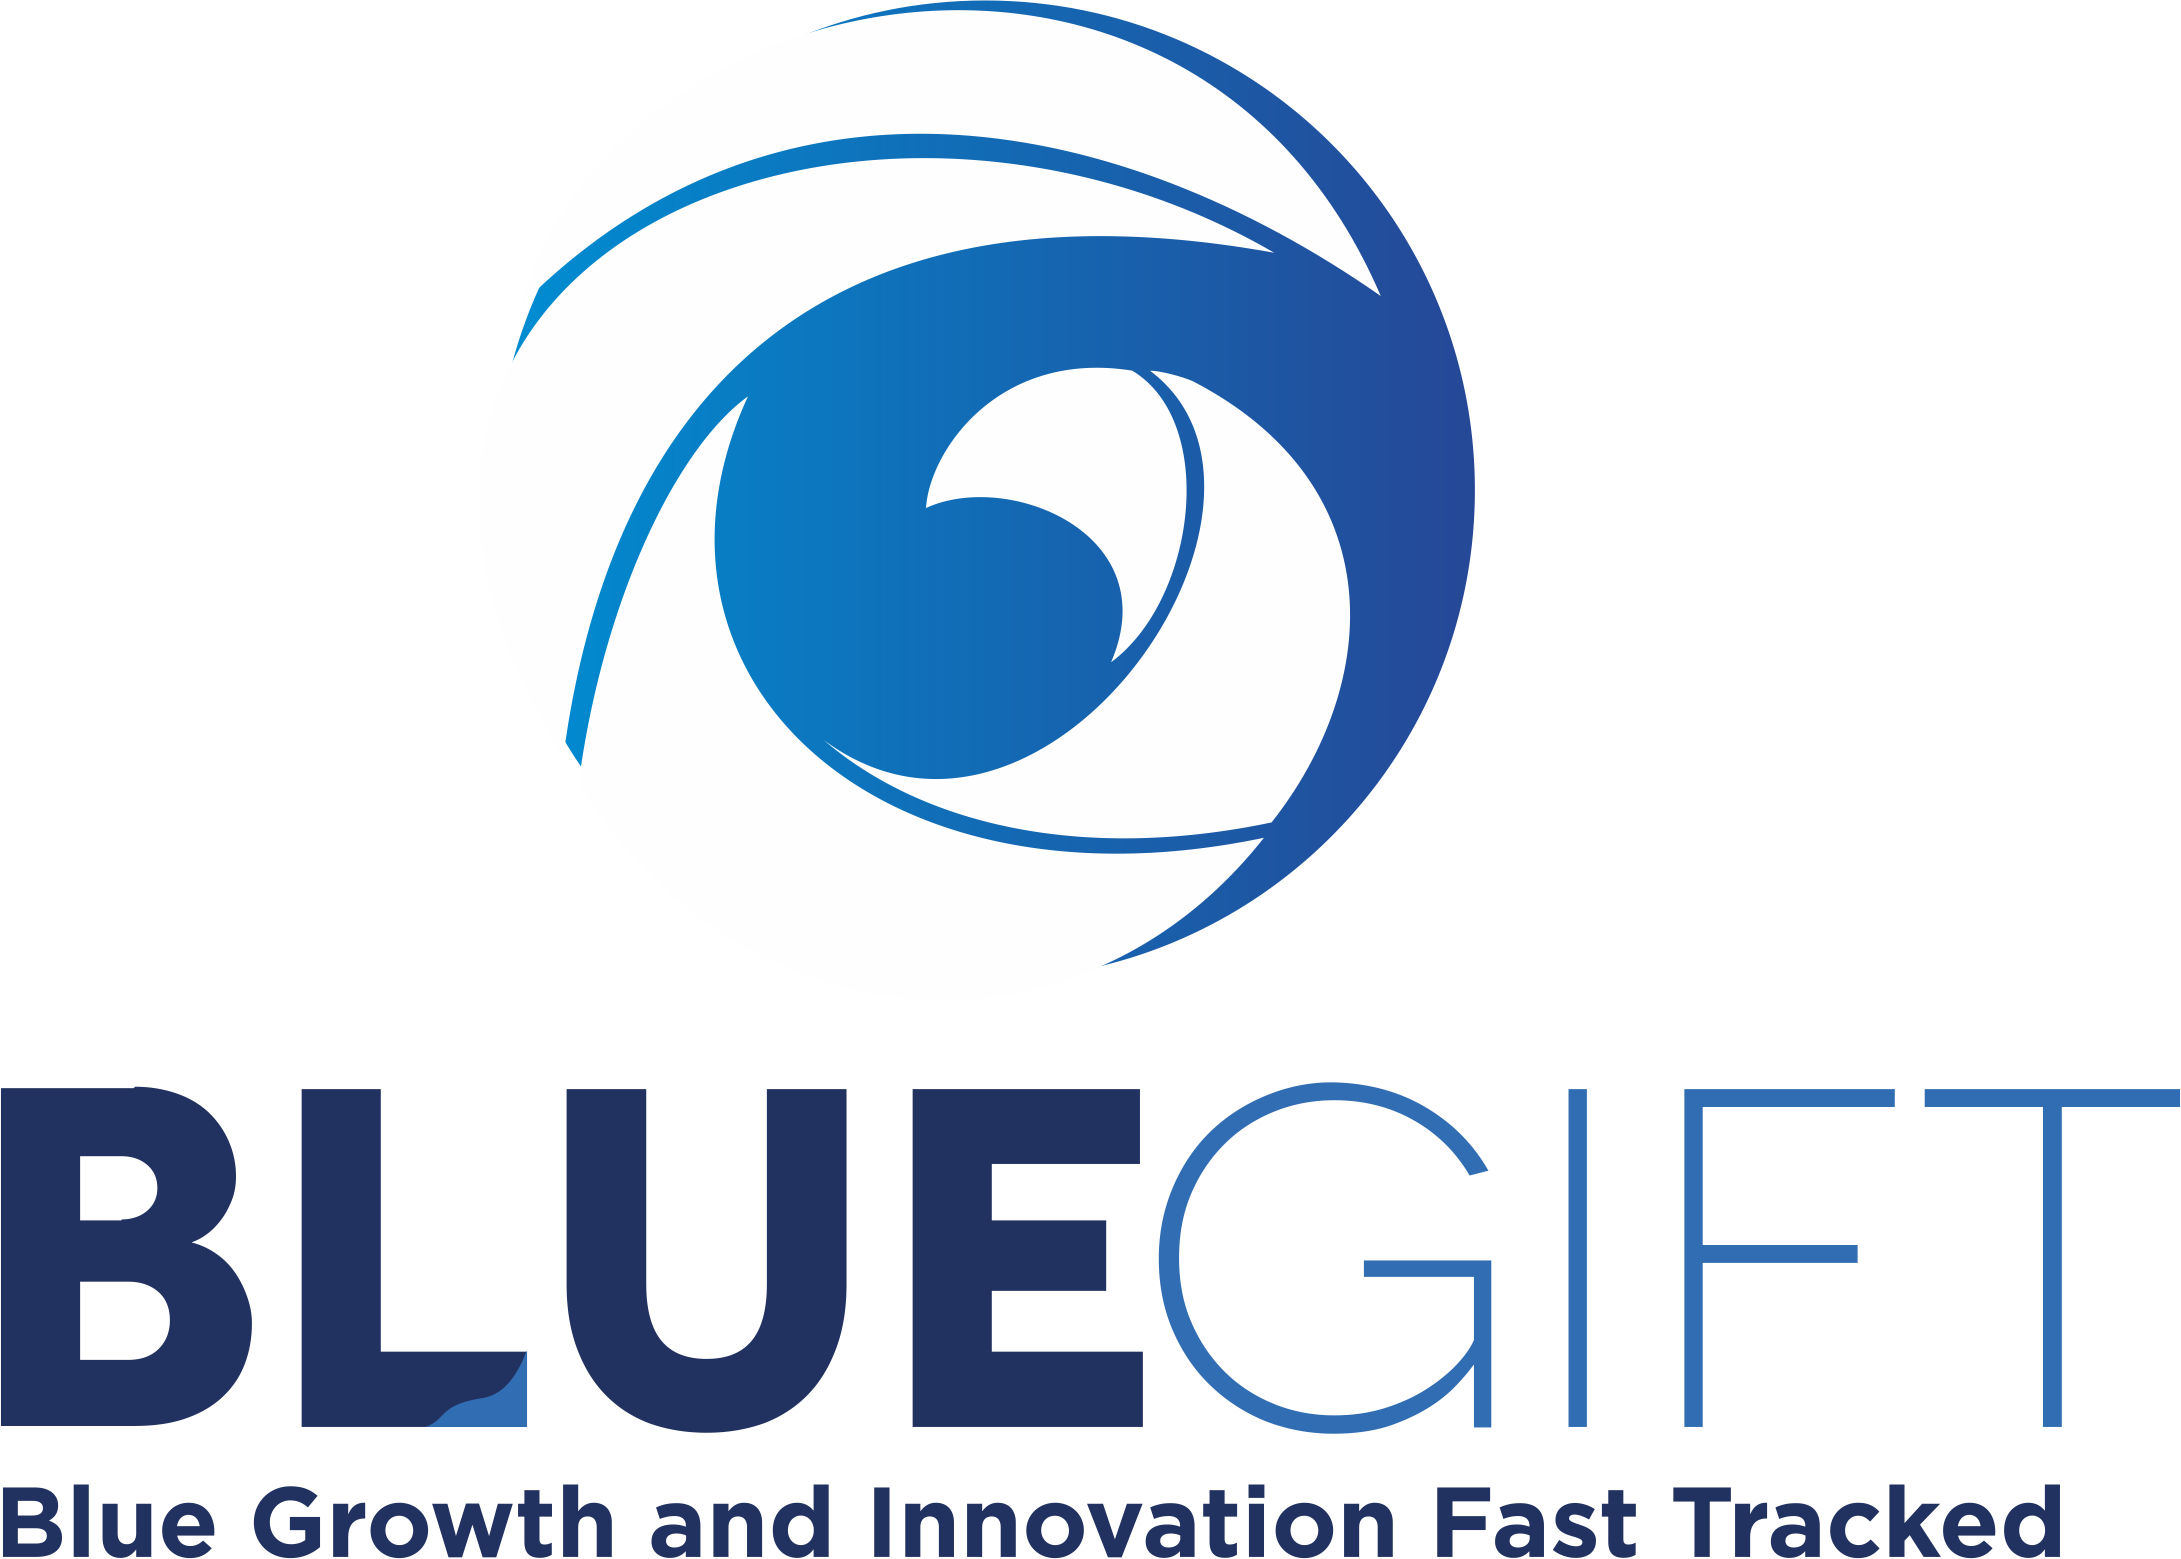 Blue-GIFT: Blue Growth and Innovation Fast Tracked